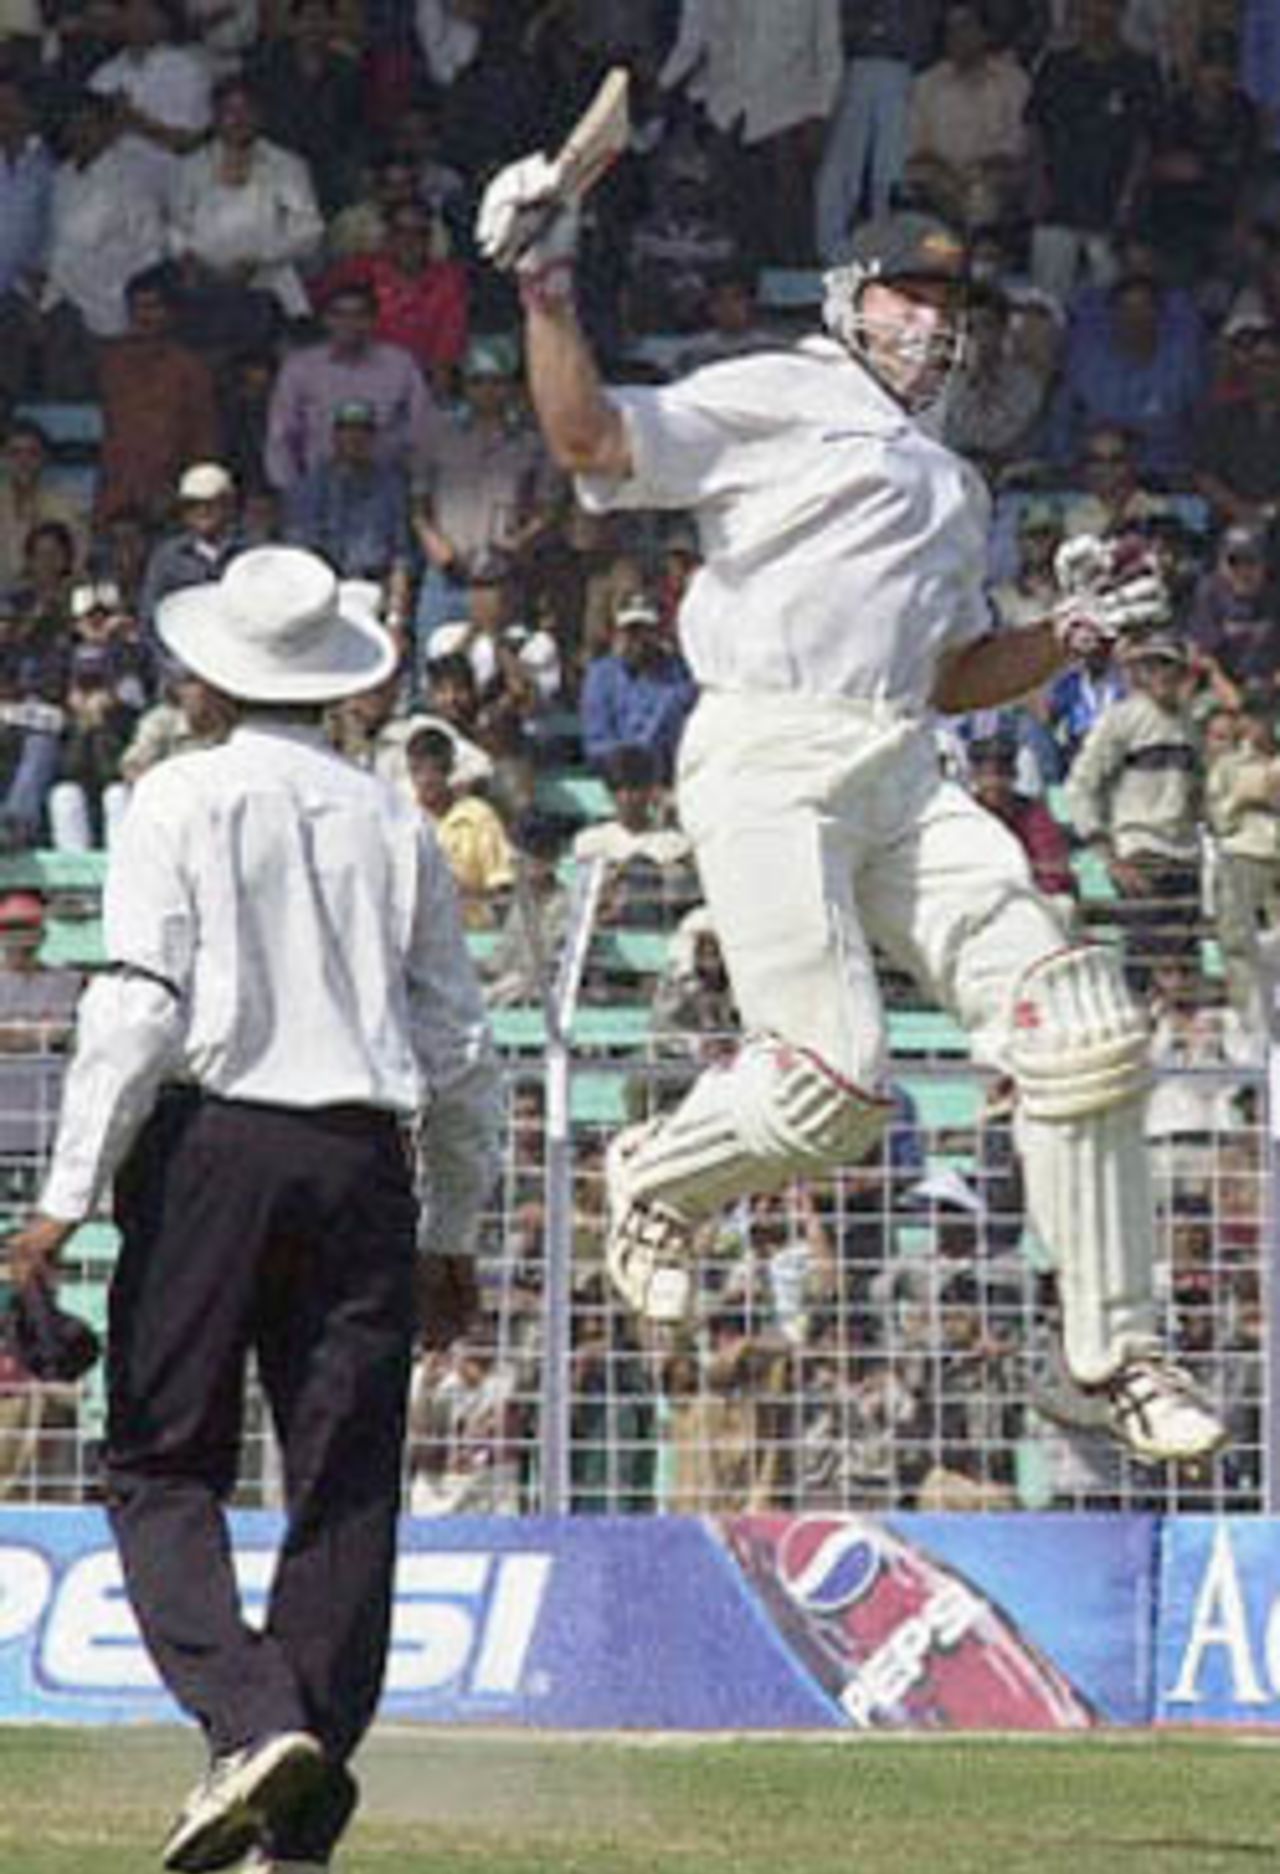 Australian batsman Matthew Hayden jumps in the air with joy after scoring the wining runs against India as the match umpire walks past on the third day of the first test match between India and Australia at the Wankhade Stadium in Bombay 01 March 2001. Australia won the first of the three test match series by 10 wickets.